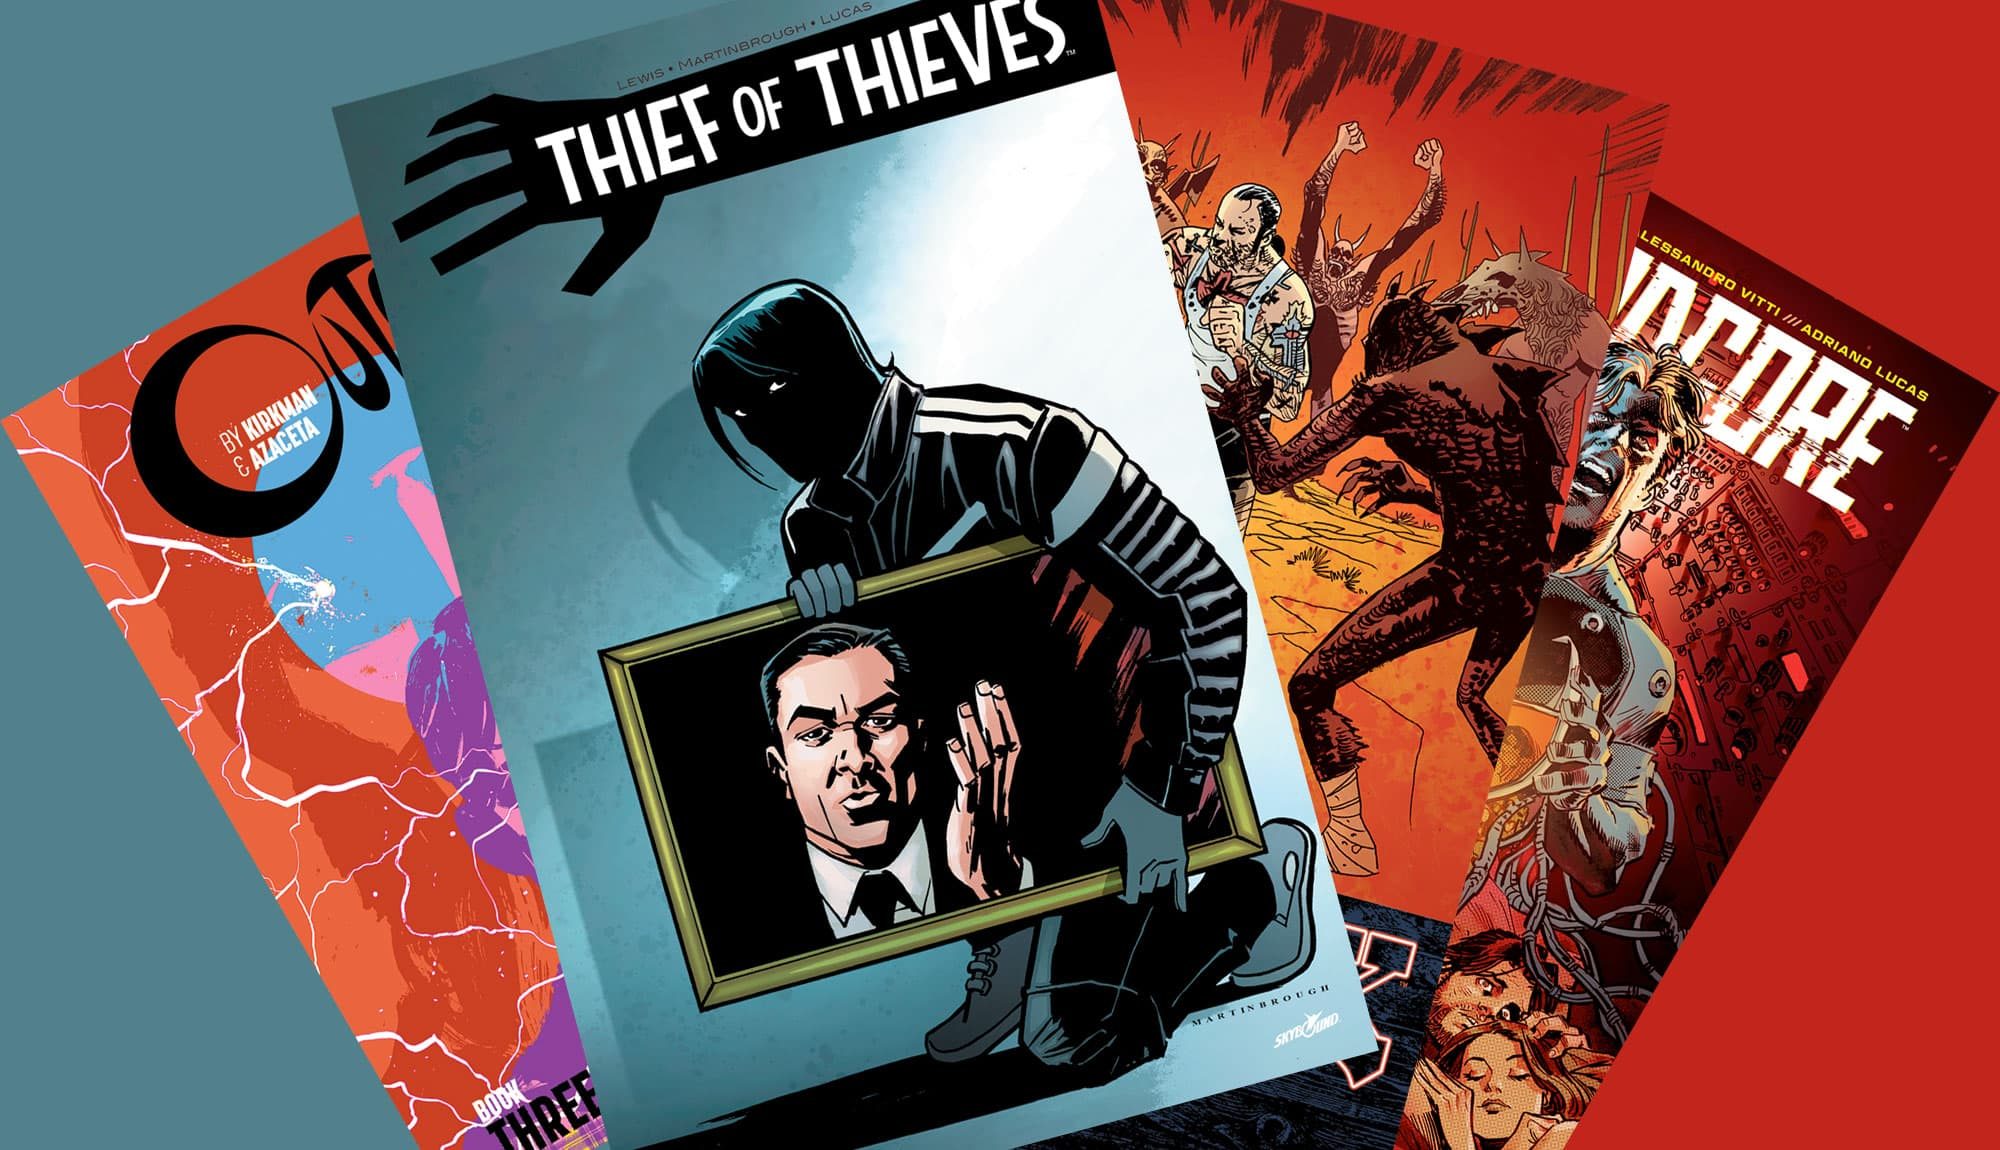 This Week’s Comics: REDNECK, THIEF OF THIEVES, HARDCORE Vol 1, OUTCAST HC Book 3